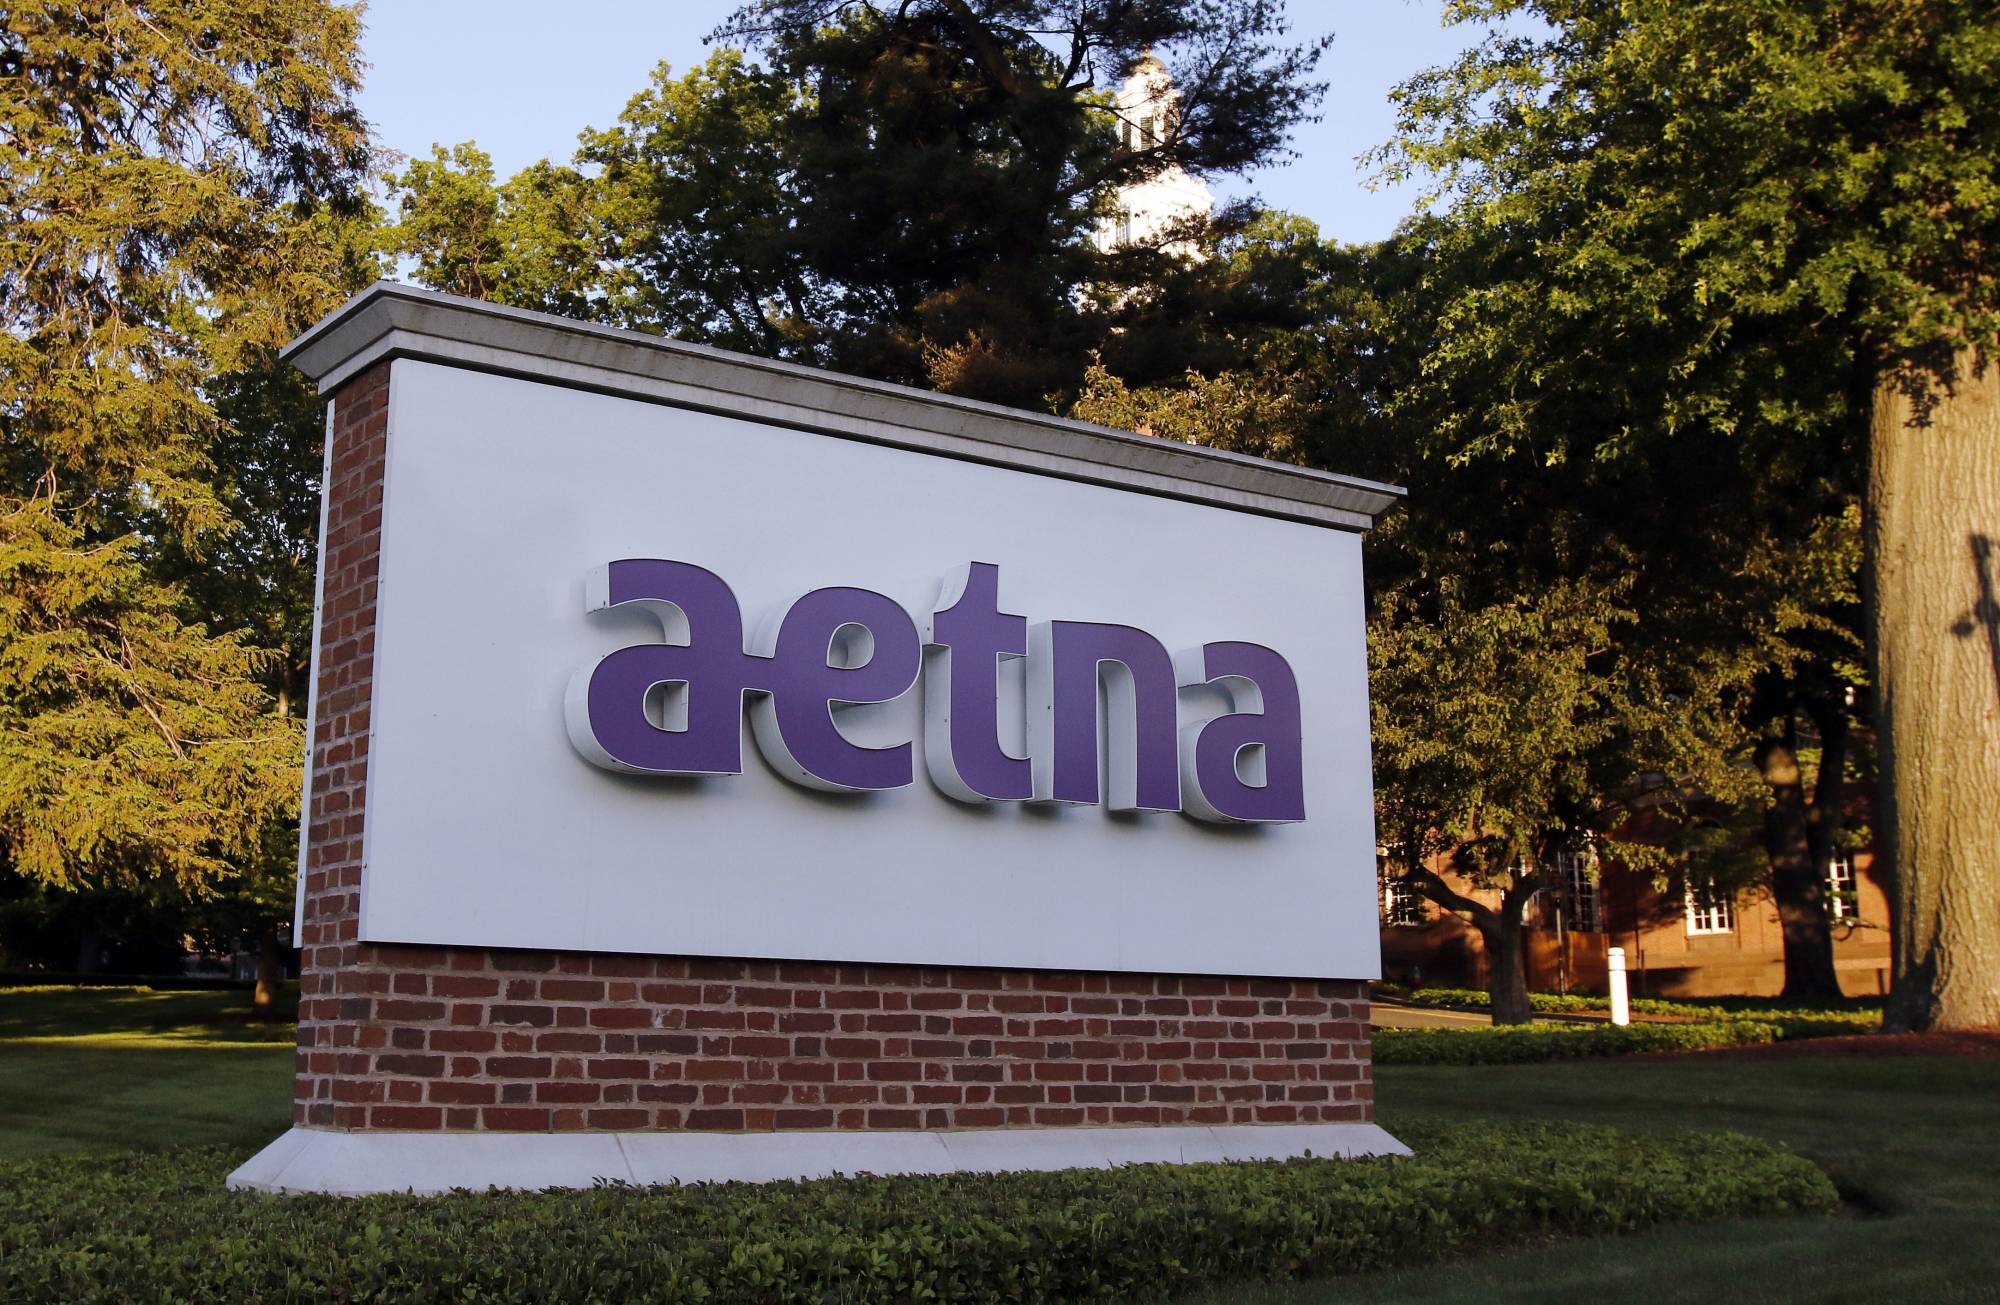 FILE - In this June 1, 2017, file photo, a sign stands on the campus of the Aetna headquarters, in Hartford, Conn. Insurers are dropping billions of dollars on acquisitions and expansions as they get more involved in their customers’ health. Late last year, CVS Health announced a roughly $69 billion deal to buy another insurer, Aetna. Those companies plan to convert drugstores into health care hotspots that people can turn to for a variety of needs in between doctor visits. (AP Photo/Bill Sikes, File)